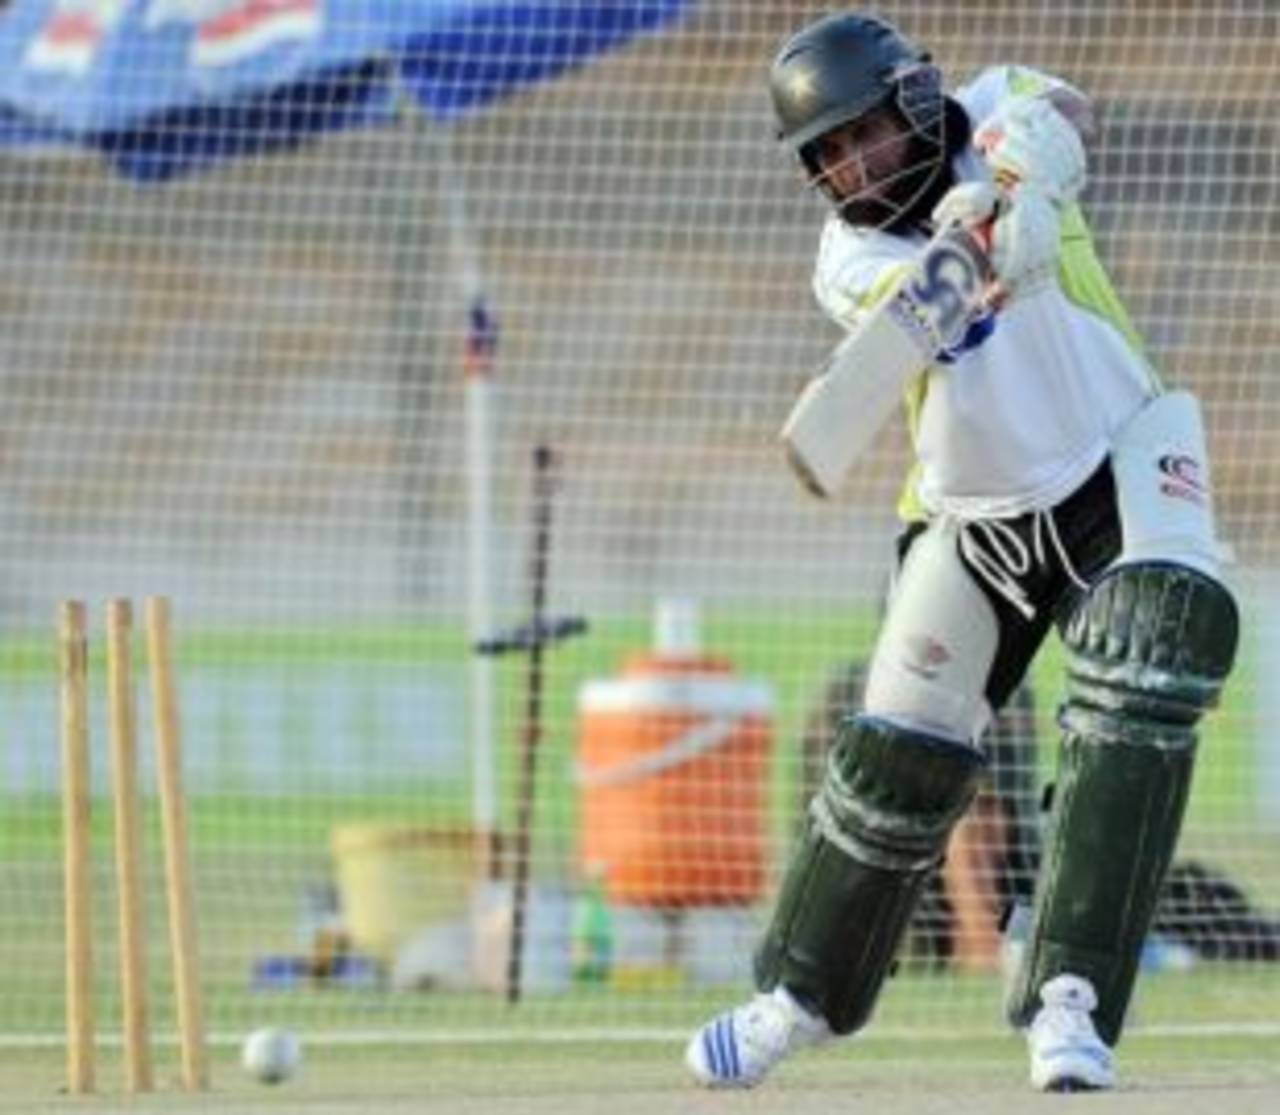 Mohammad Yousuf has a hit in the nets ahead of the fifth ODI against Bangladesh, Karachi, April 18, 2008